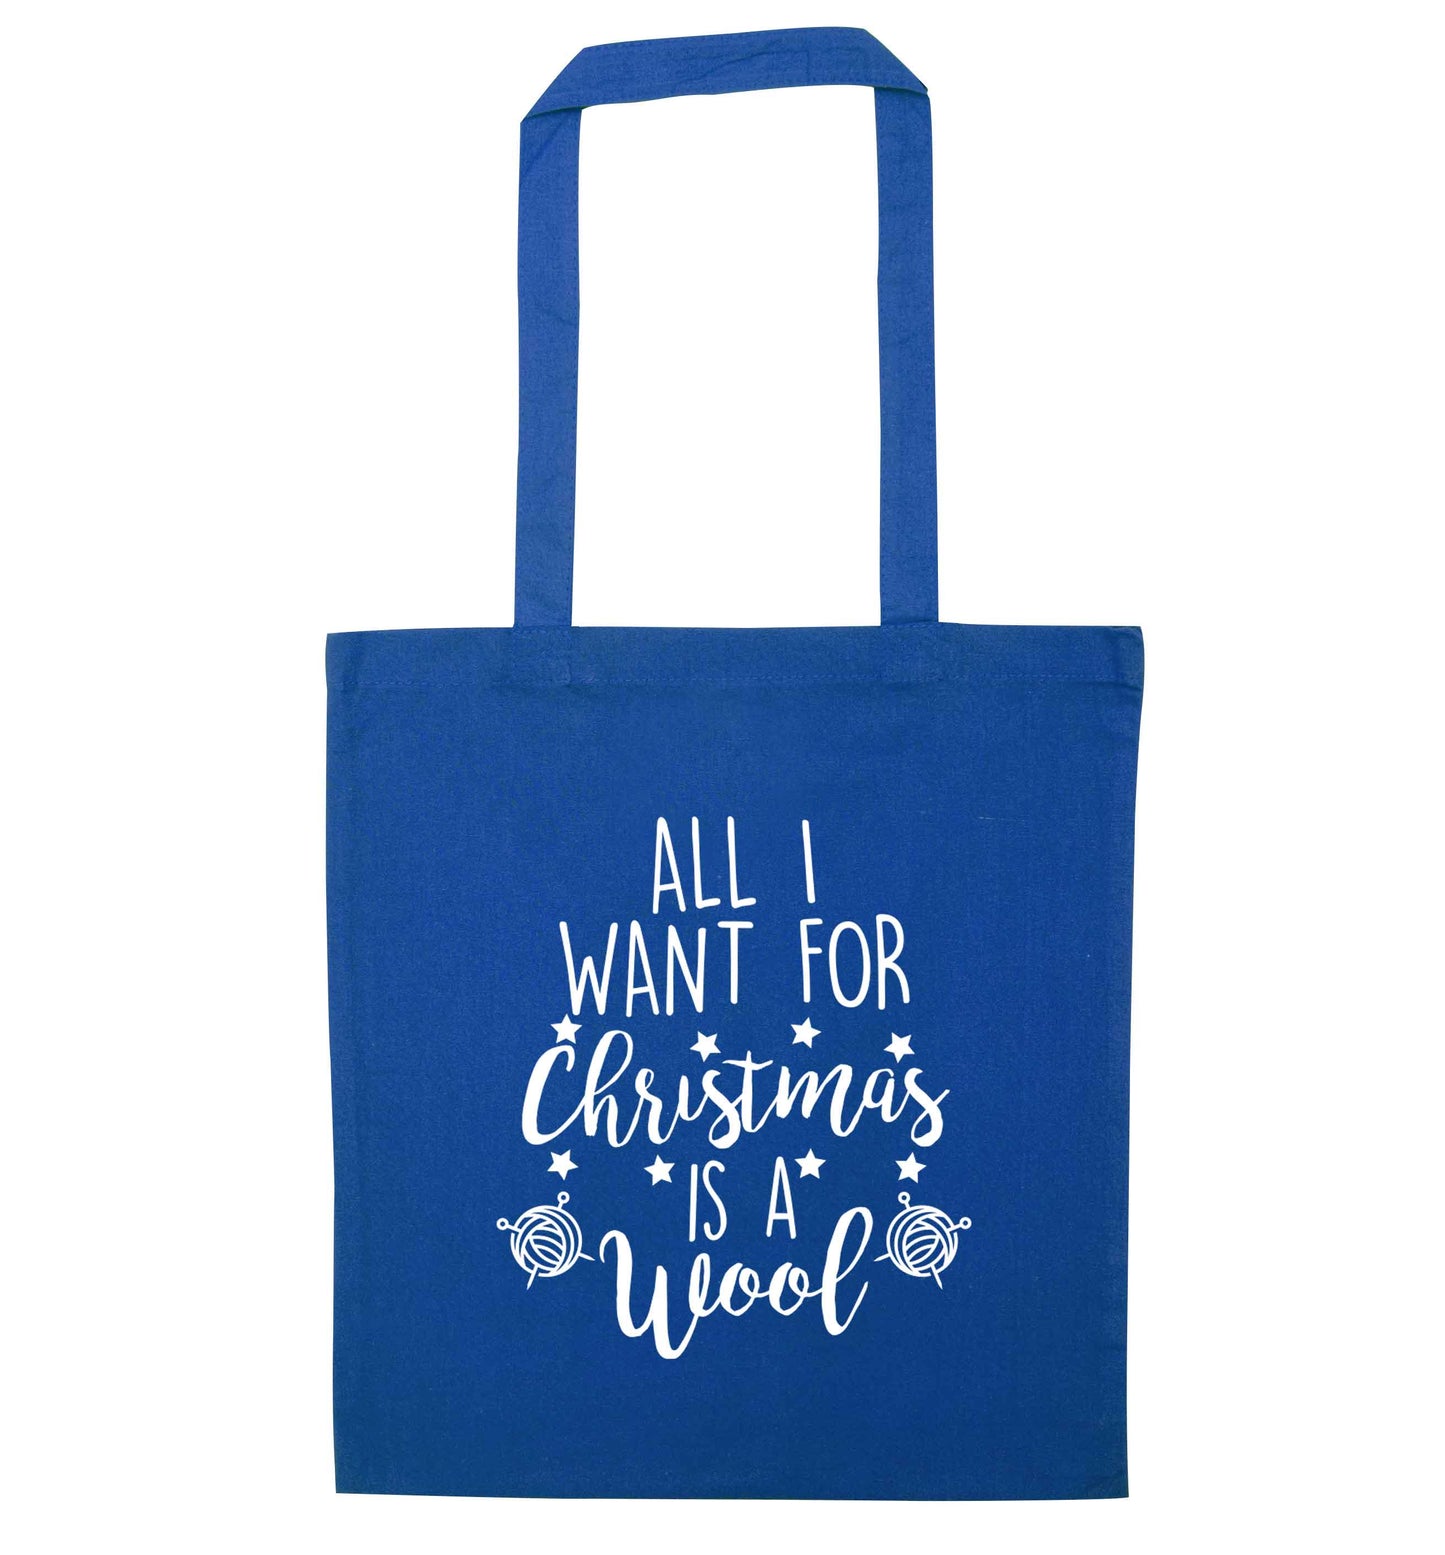 All I want for Christmas is wool! blue tote bag